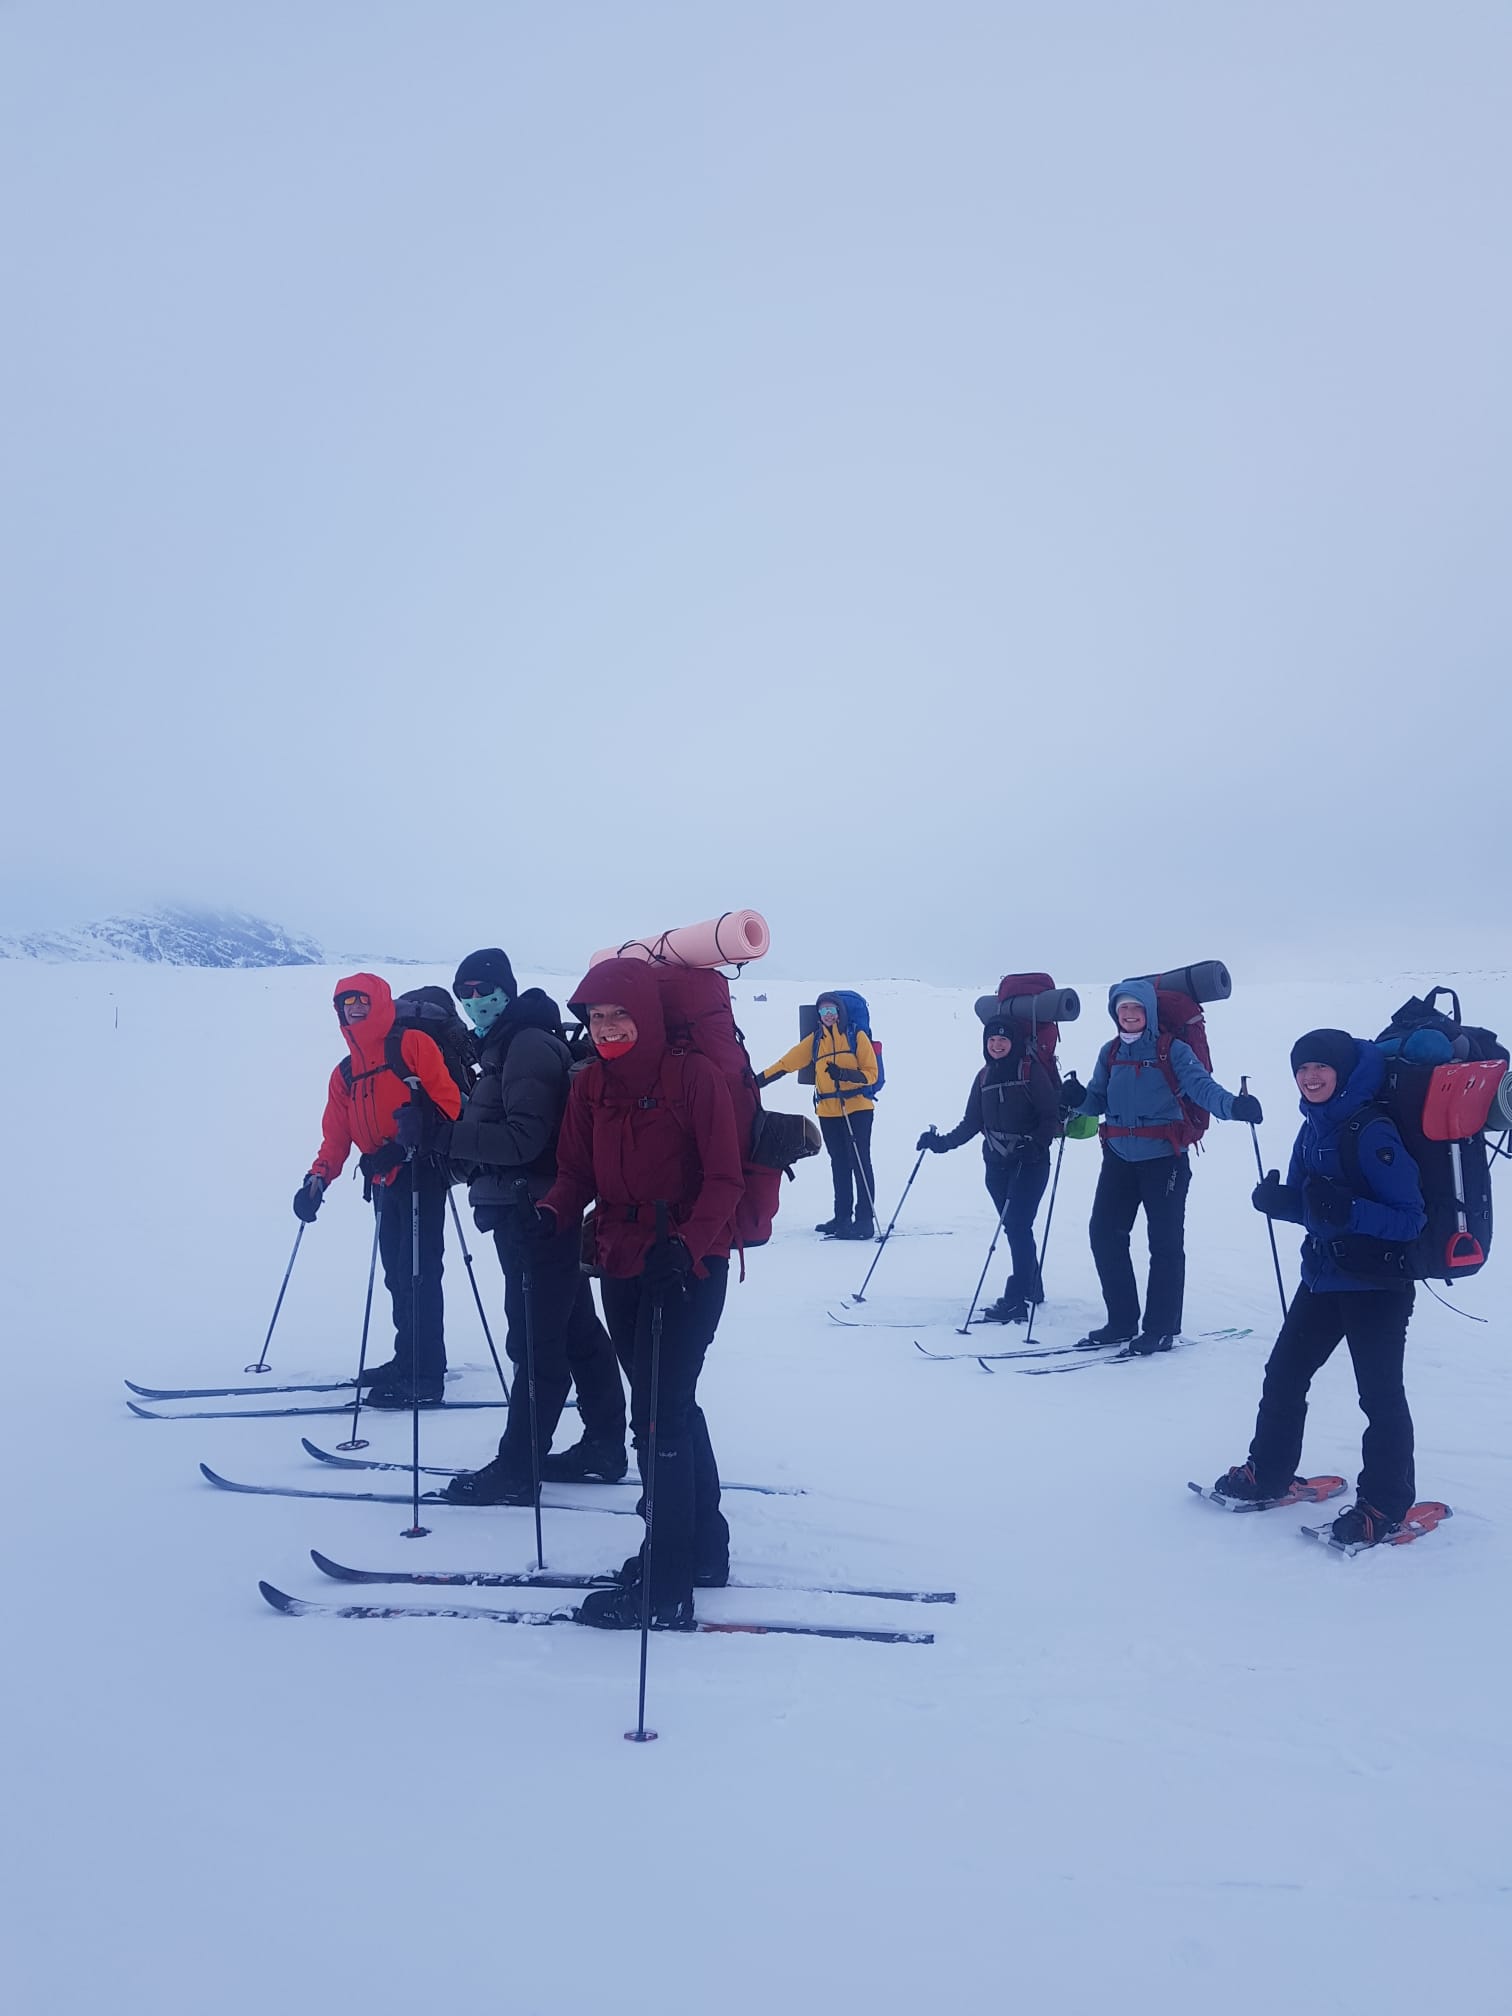 Students pack skiing on snow